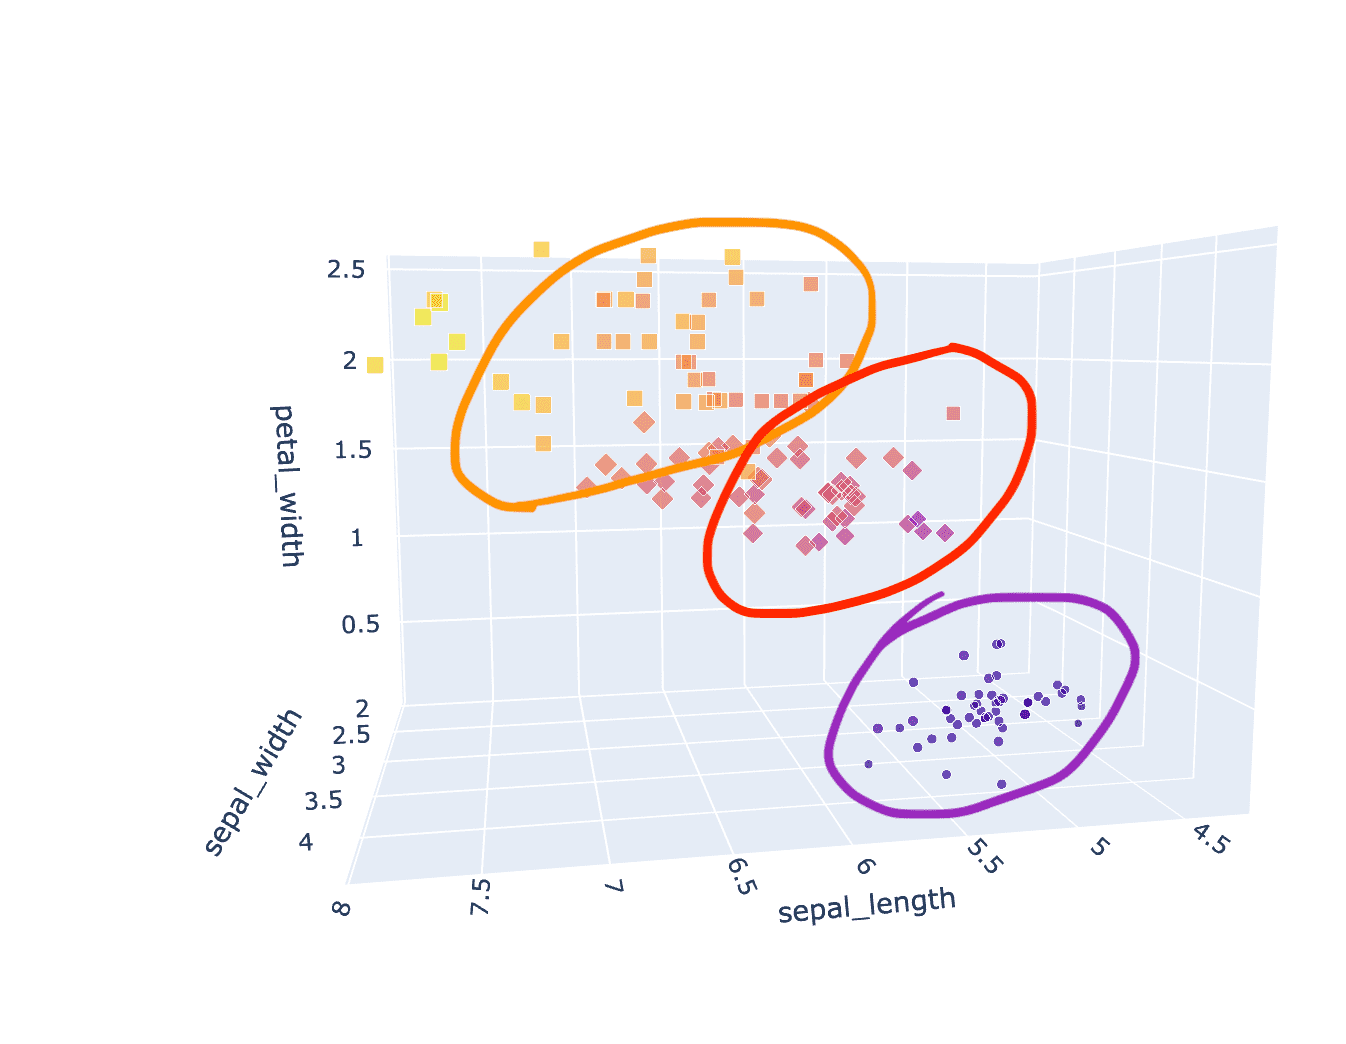 Same example of a 3D scatter plot as before. Now we have encircled parts of the clusters, these are our 